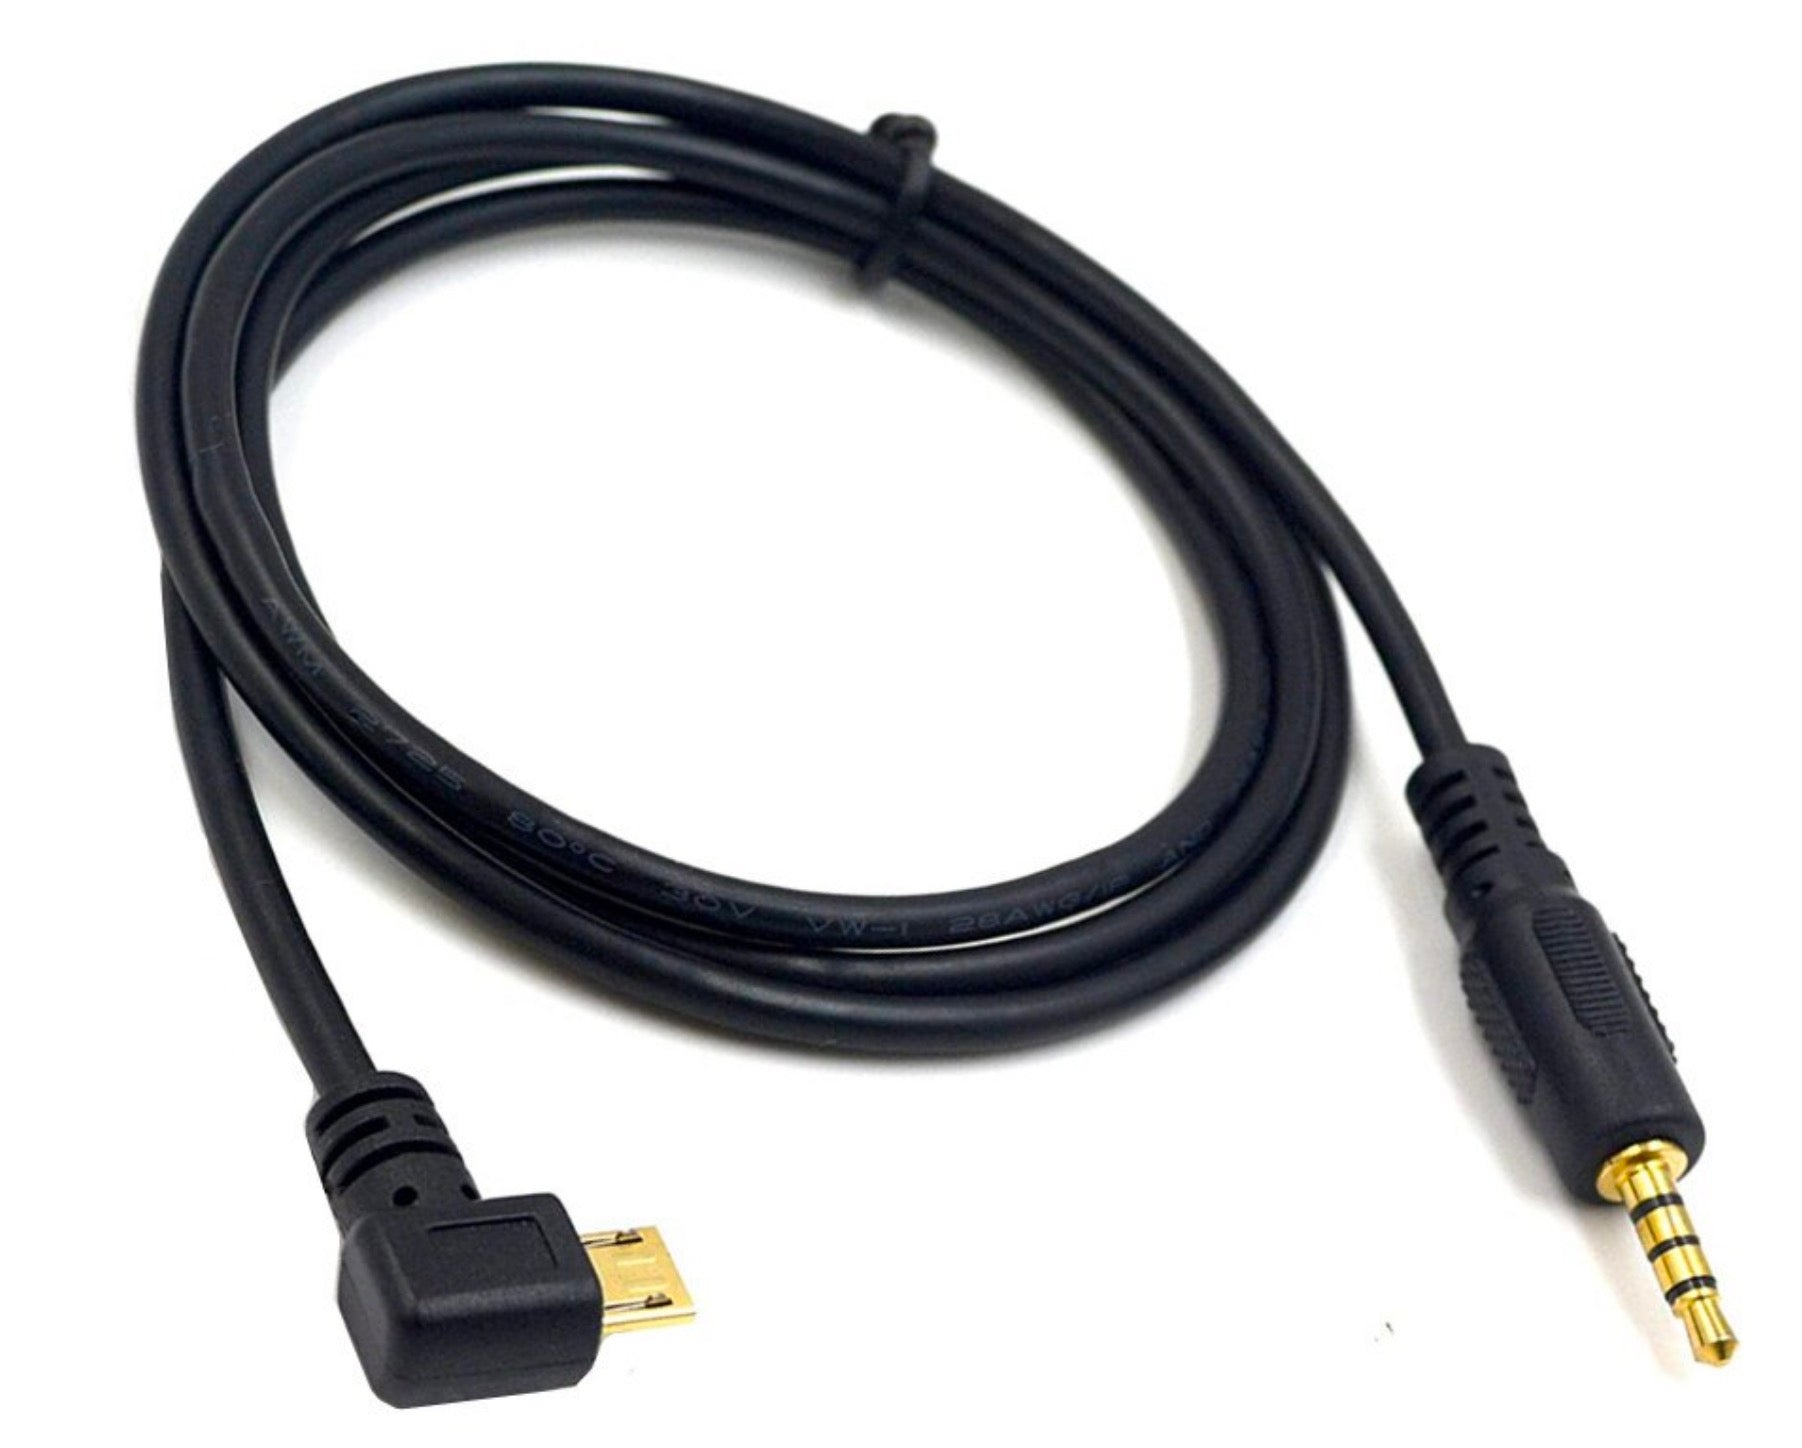 3.5mm Male 4 Pole to Micro USB Male Left Angle Audio Cable 1m